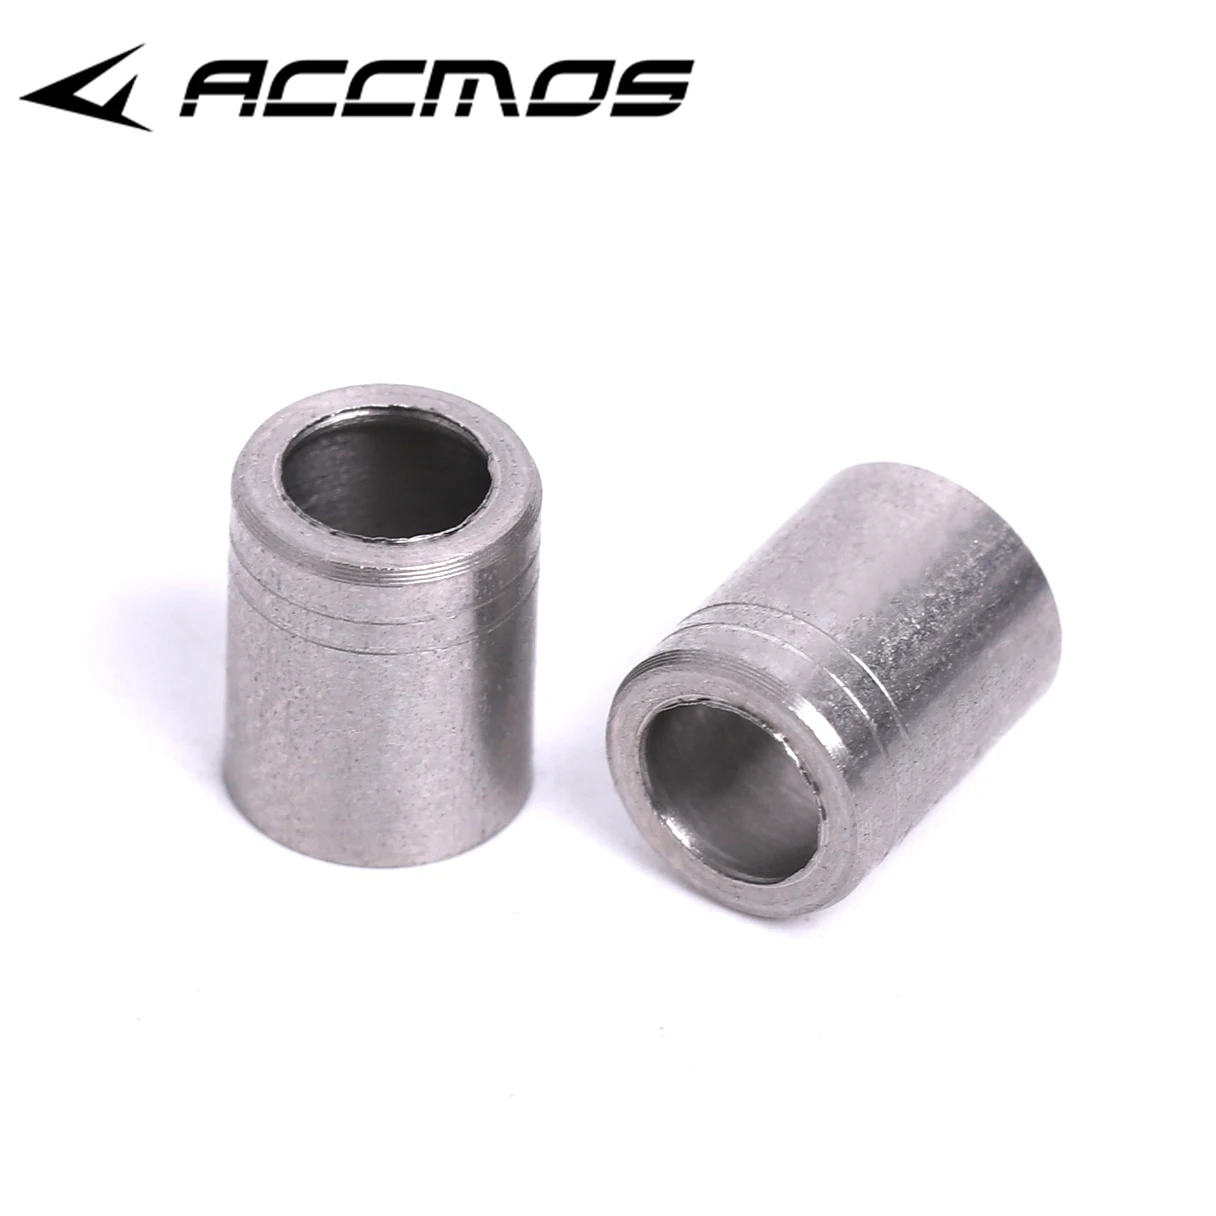 

12pcs Archery Stainless Steel Explosion-proof Arrow Shaft Protecter Ring For The ID 6.2mm or ID4.2mm Bow Accessories